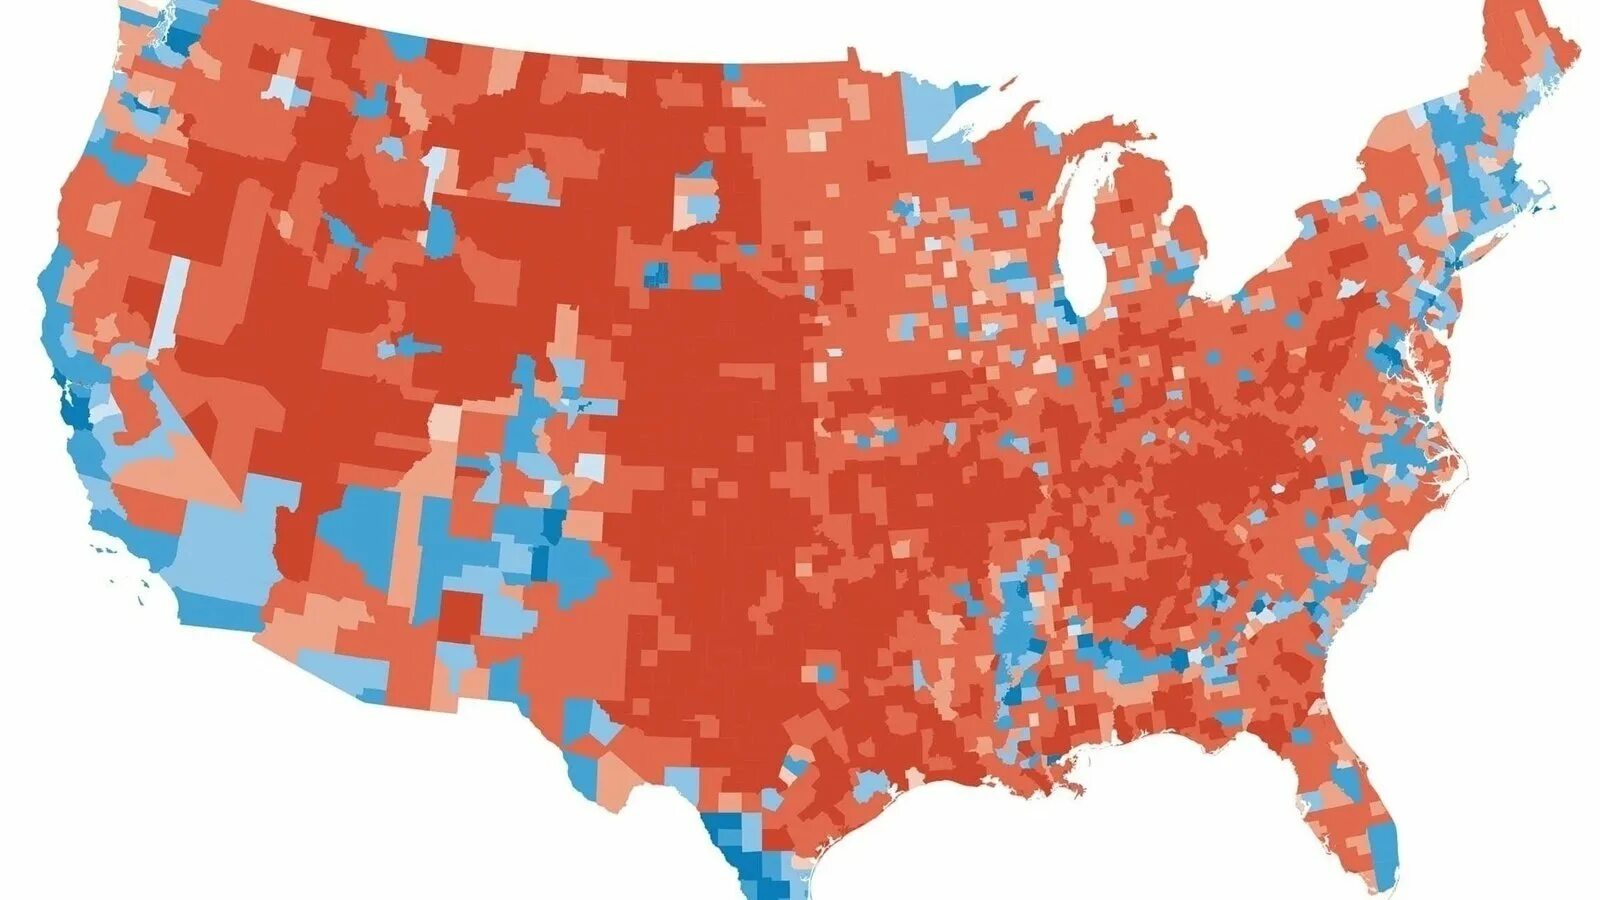 Election results. 2020 Election Results by State. Electoral Map USA by County. Election 1984 County Map. Electoral College 2016.